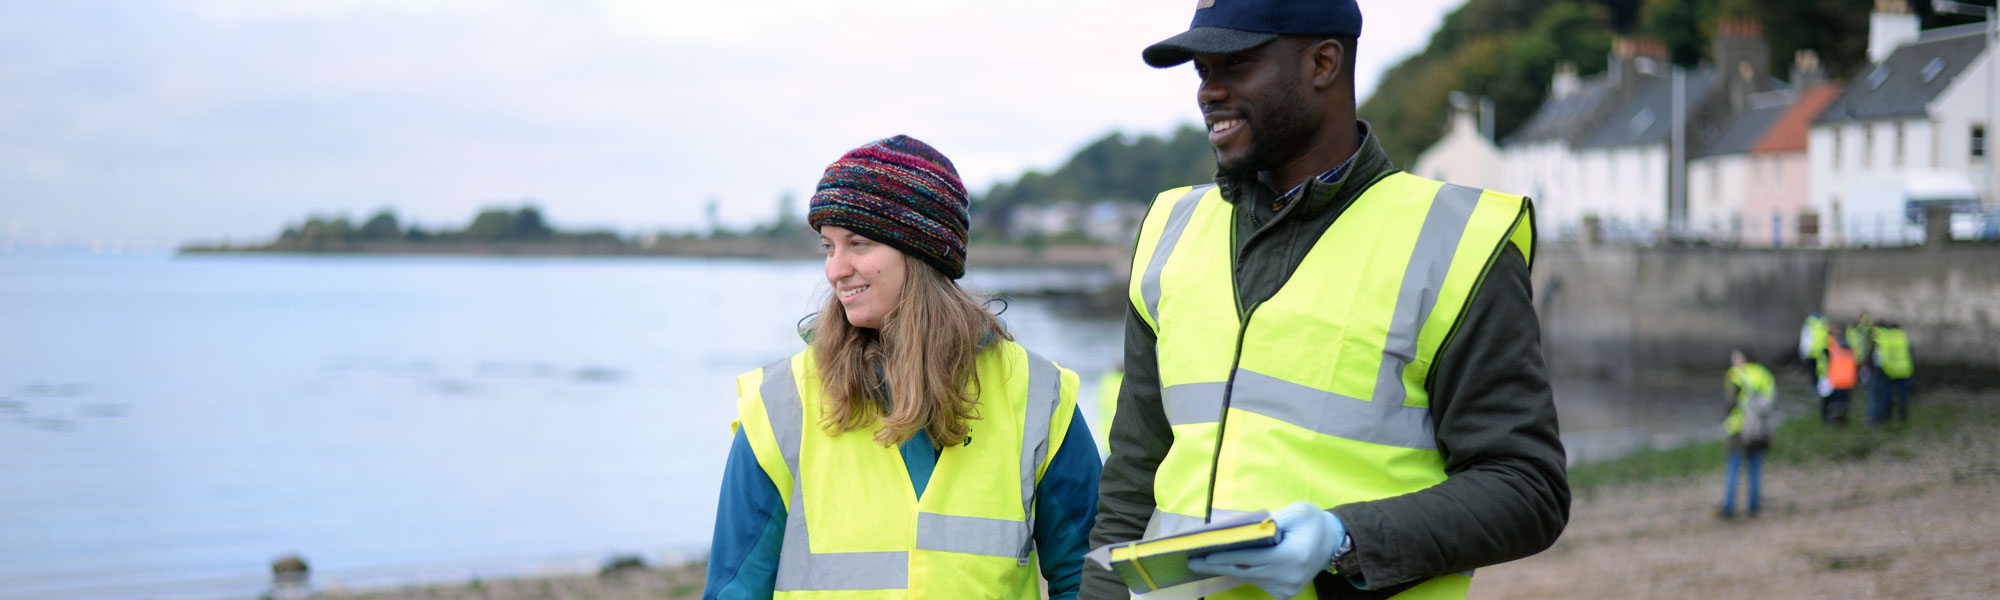 Two Civil & Environmental Engineering students wearing high vis vests on a beach in limekilns smiling and looking off camera with their classmates in the background, also wearing high vis vests, collecting samples